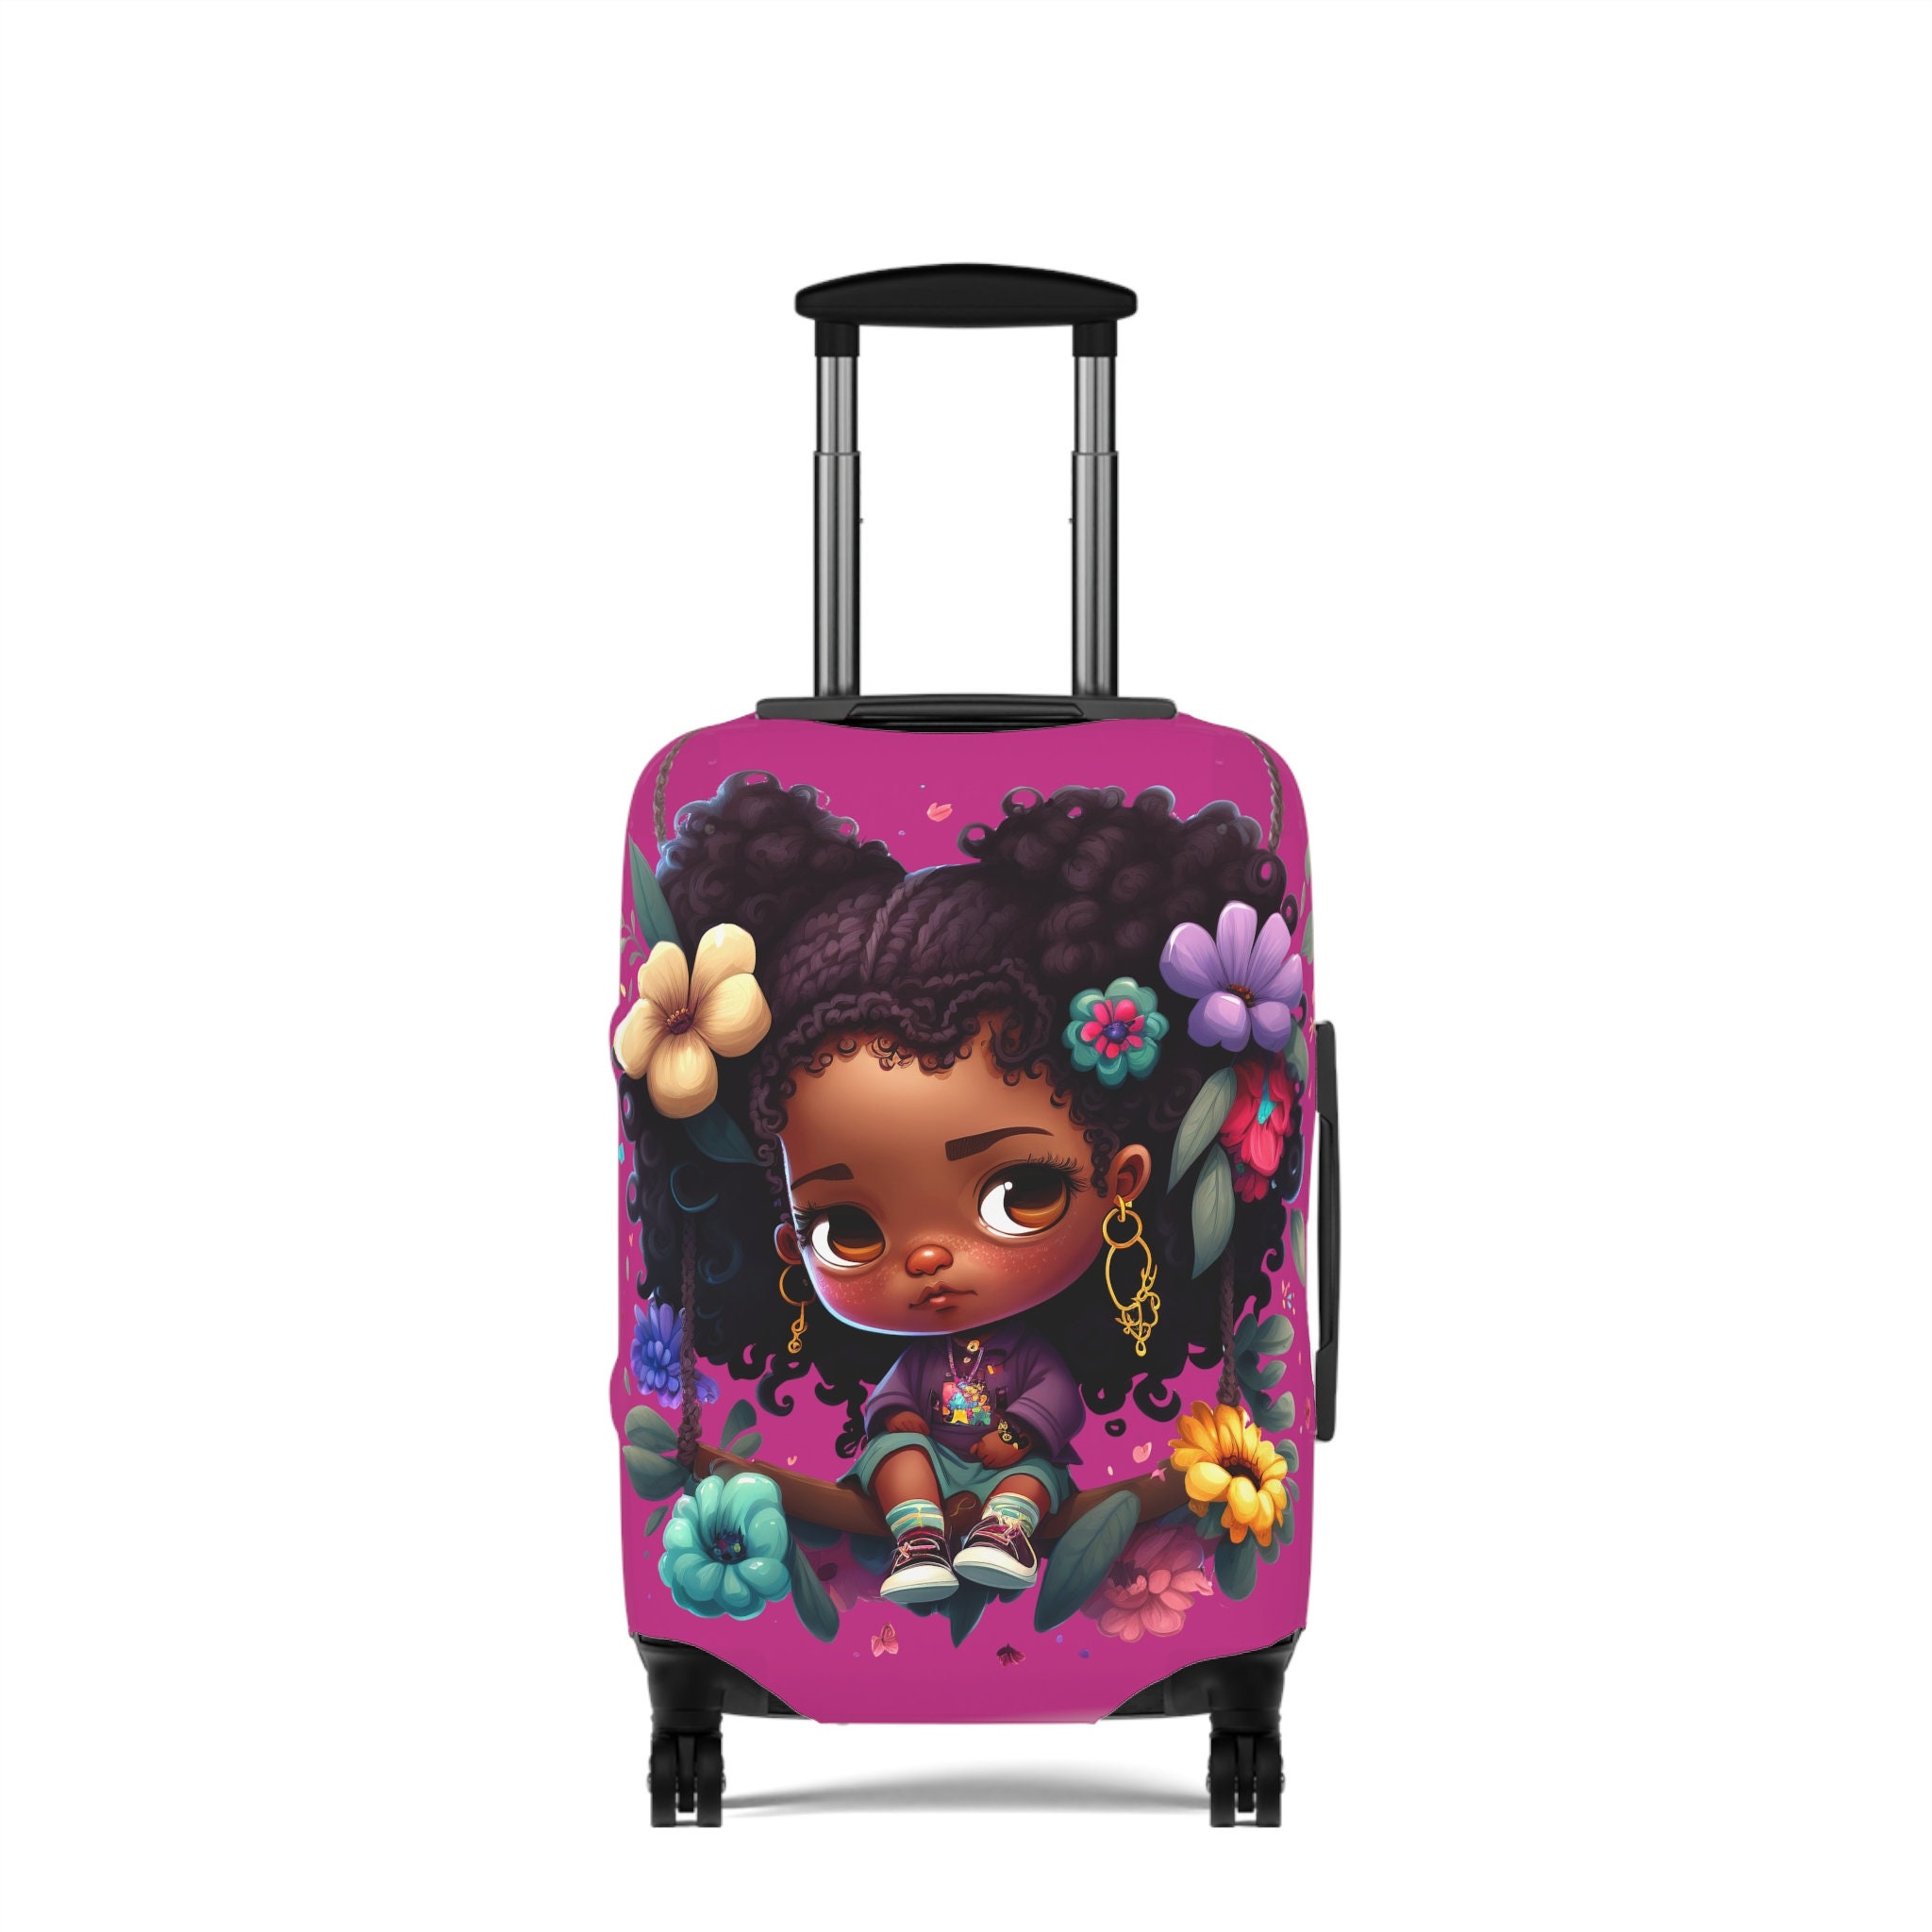 Cute Girl Luggage Cover Great Friend Gifts, Easy Luggage